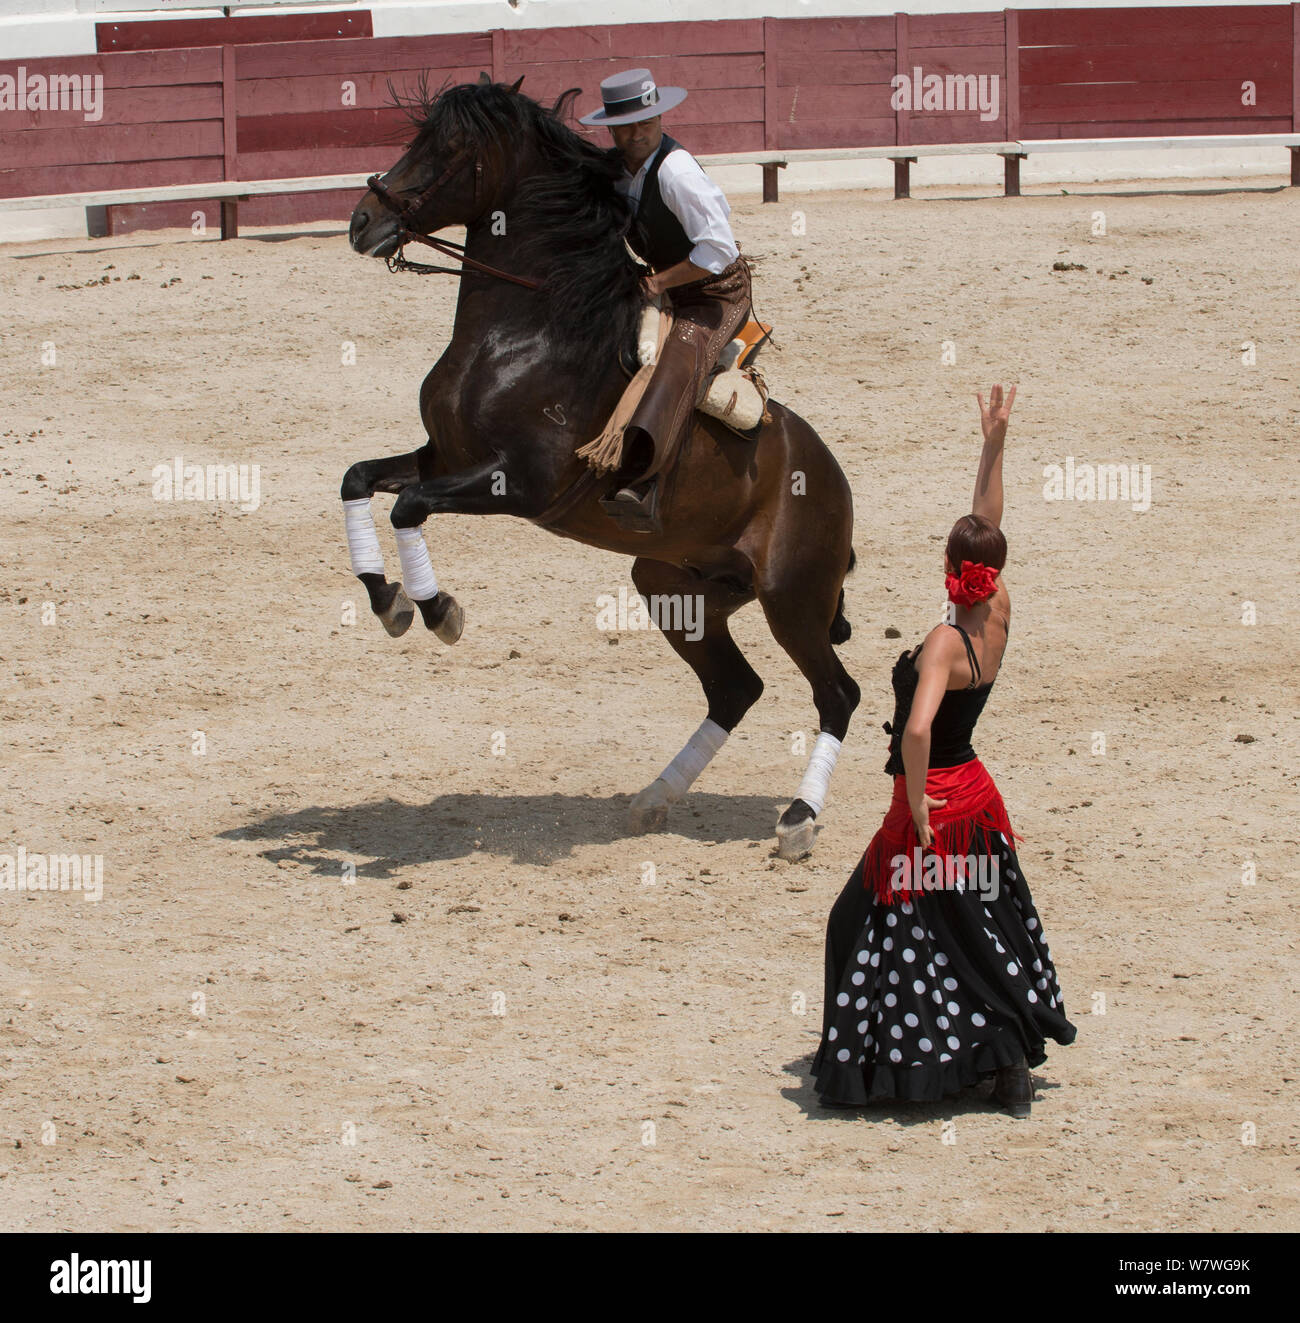 Gardian on rearing horse and woman in flamenco costume, at Mejanes Horse Fair - Feria Cheval Mejanes, Camargue, France, July 2013. Stock Photo